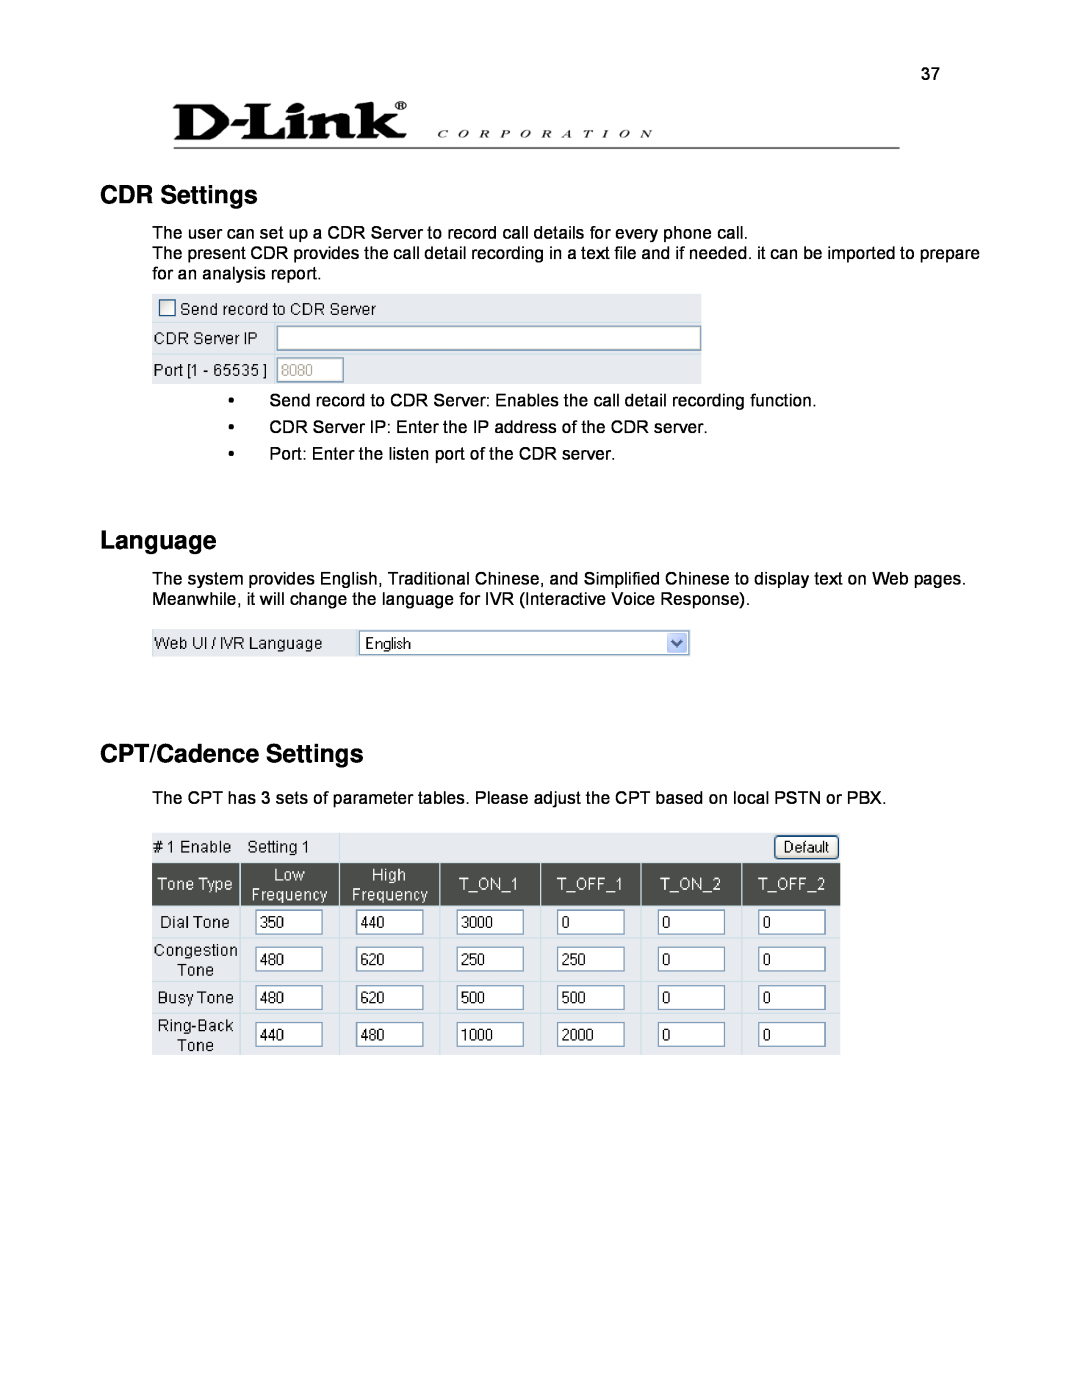 D-Link DVG-2032S user manual CDR Settings, Language, CPT/Cadence Settings 